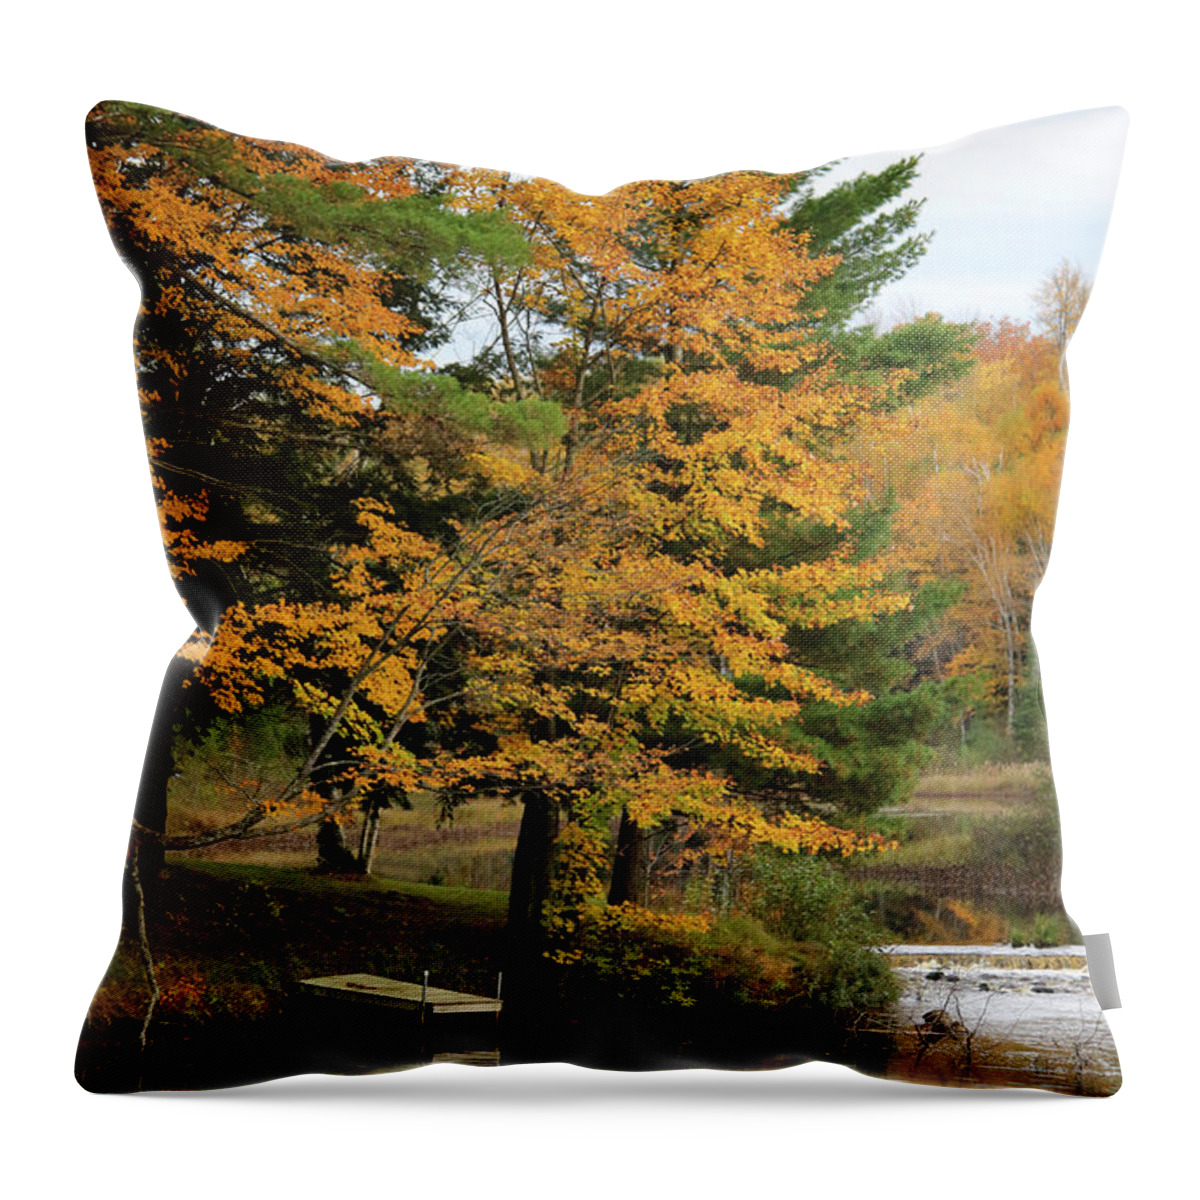 River Throw Pillow featuring the photograph Autumns Arrival by Brook Burling